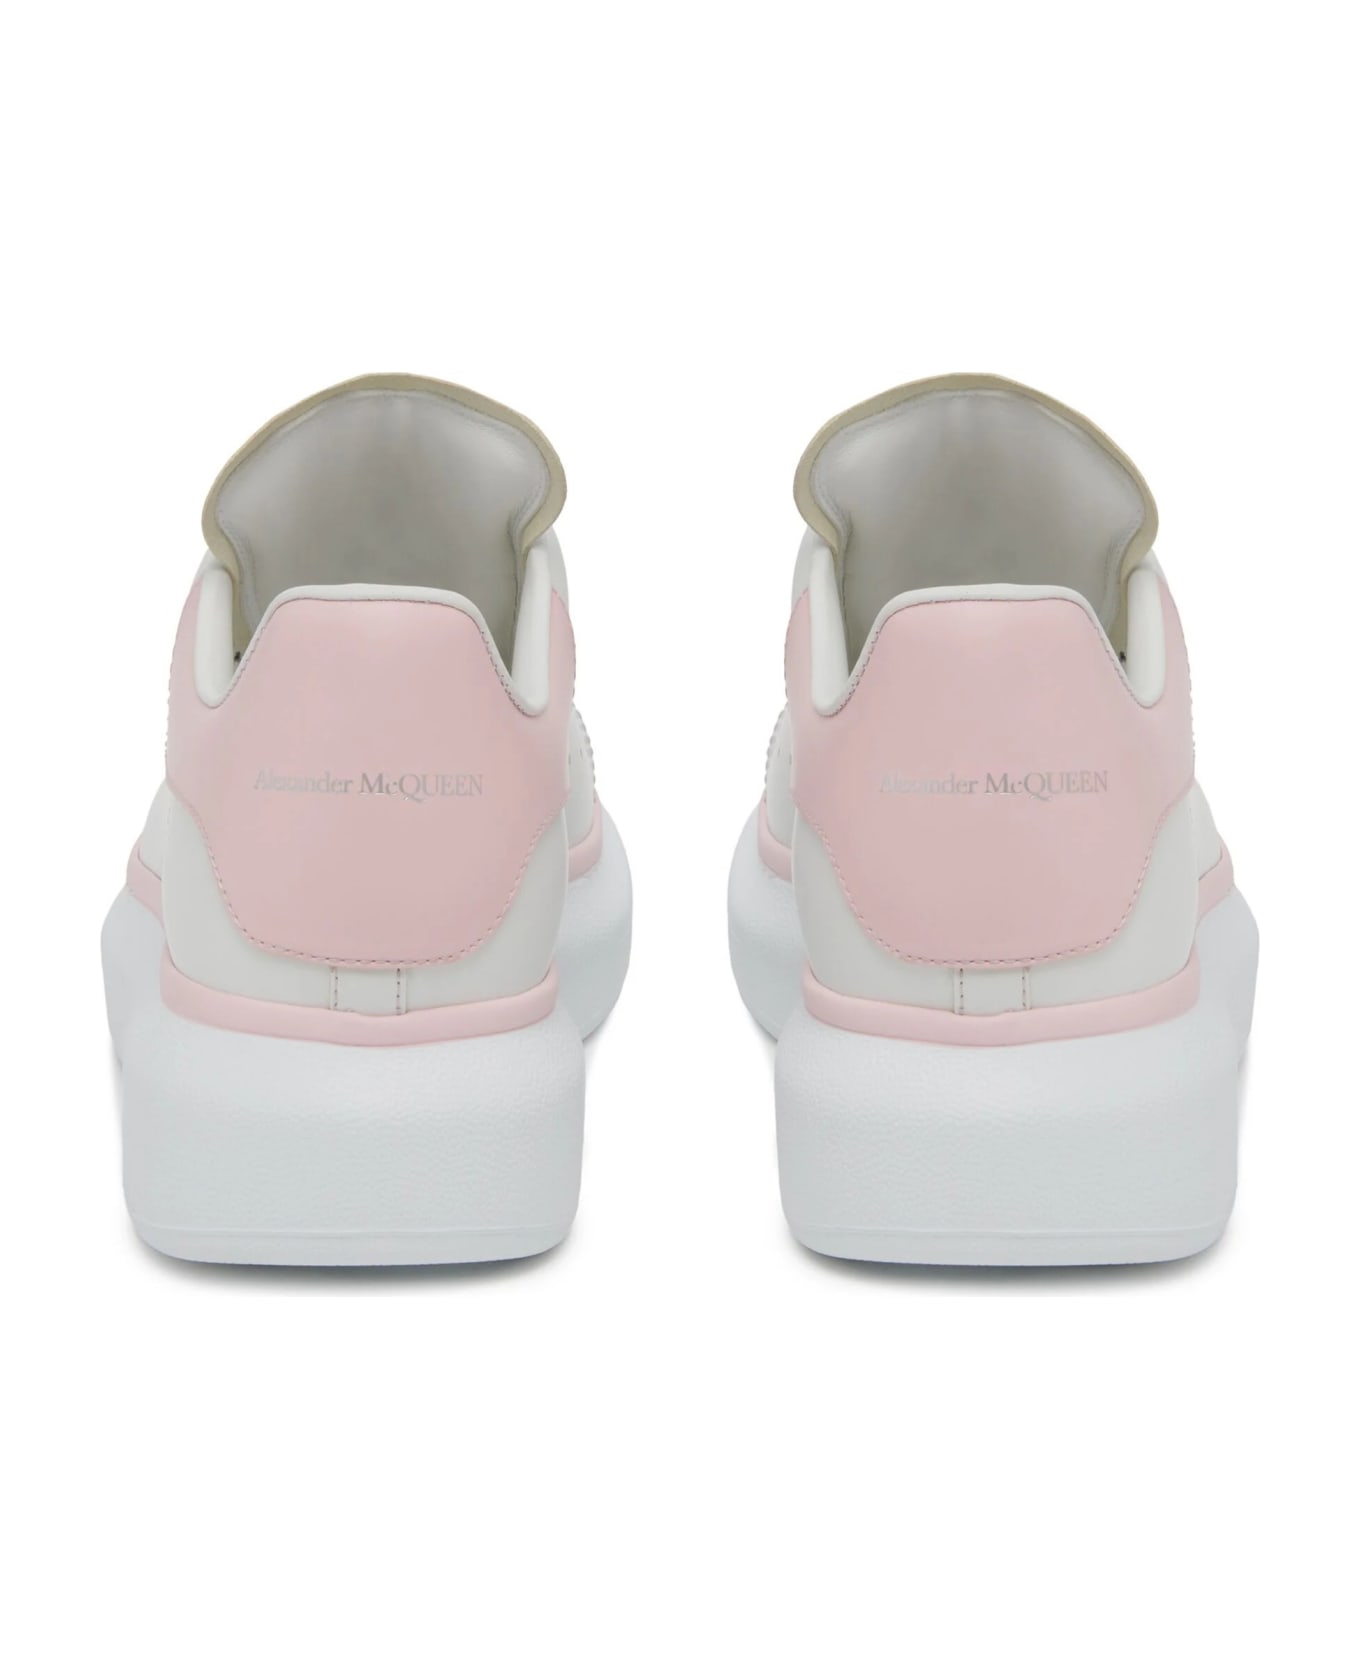 Alexander McQueen White Oversized Sneakers With Powder Pink Details - White